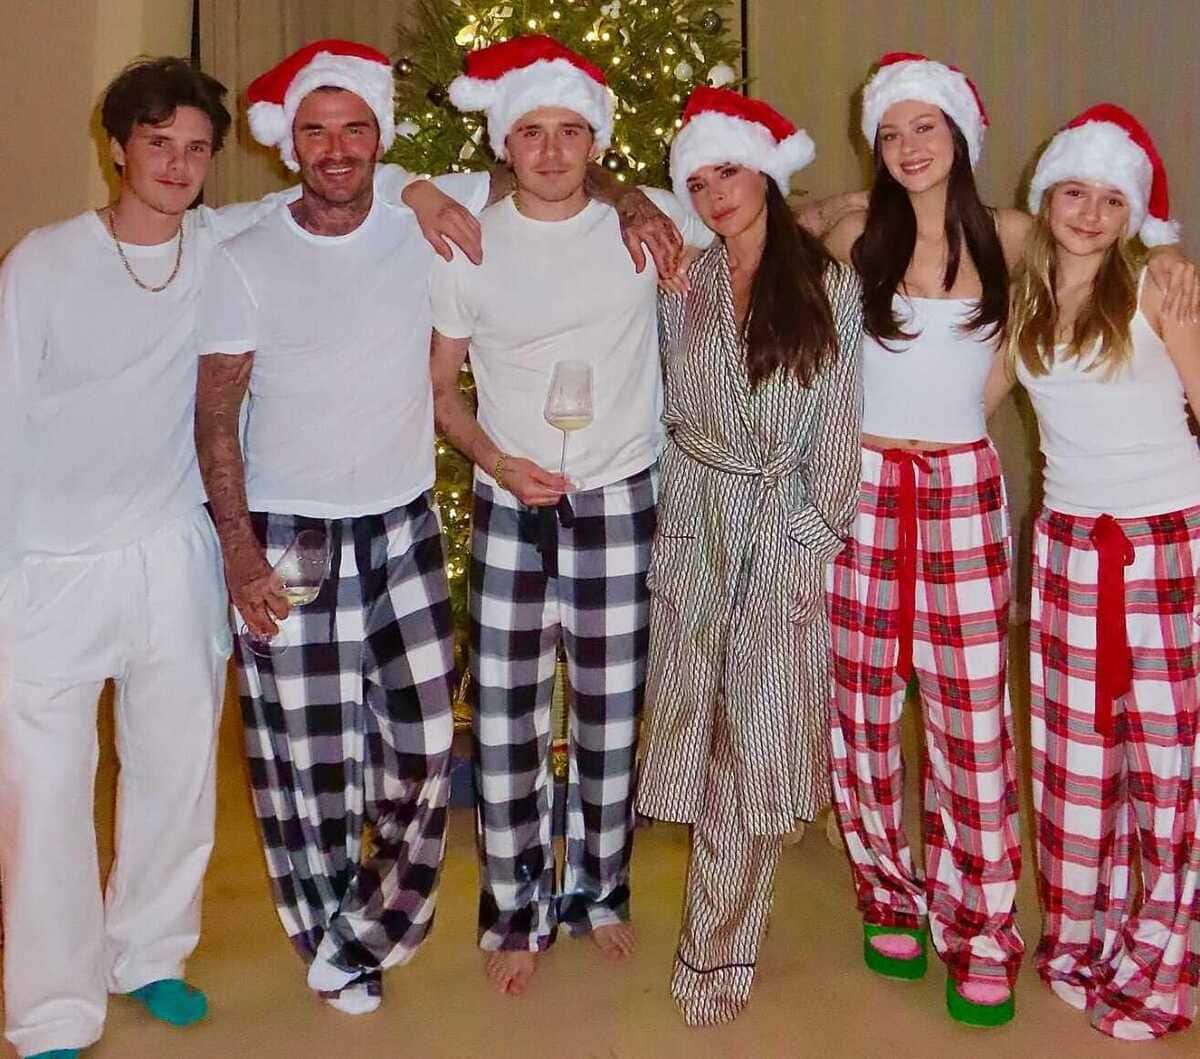 Victoria and David Beckham with family posed for Christmas.